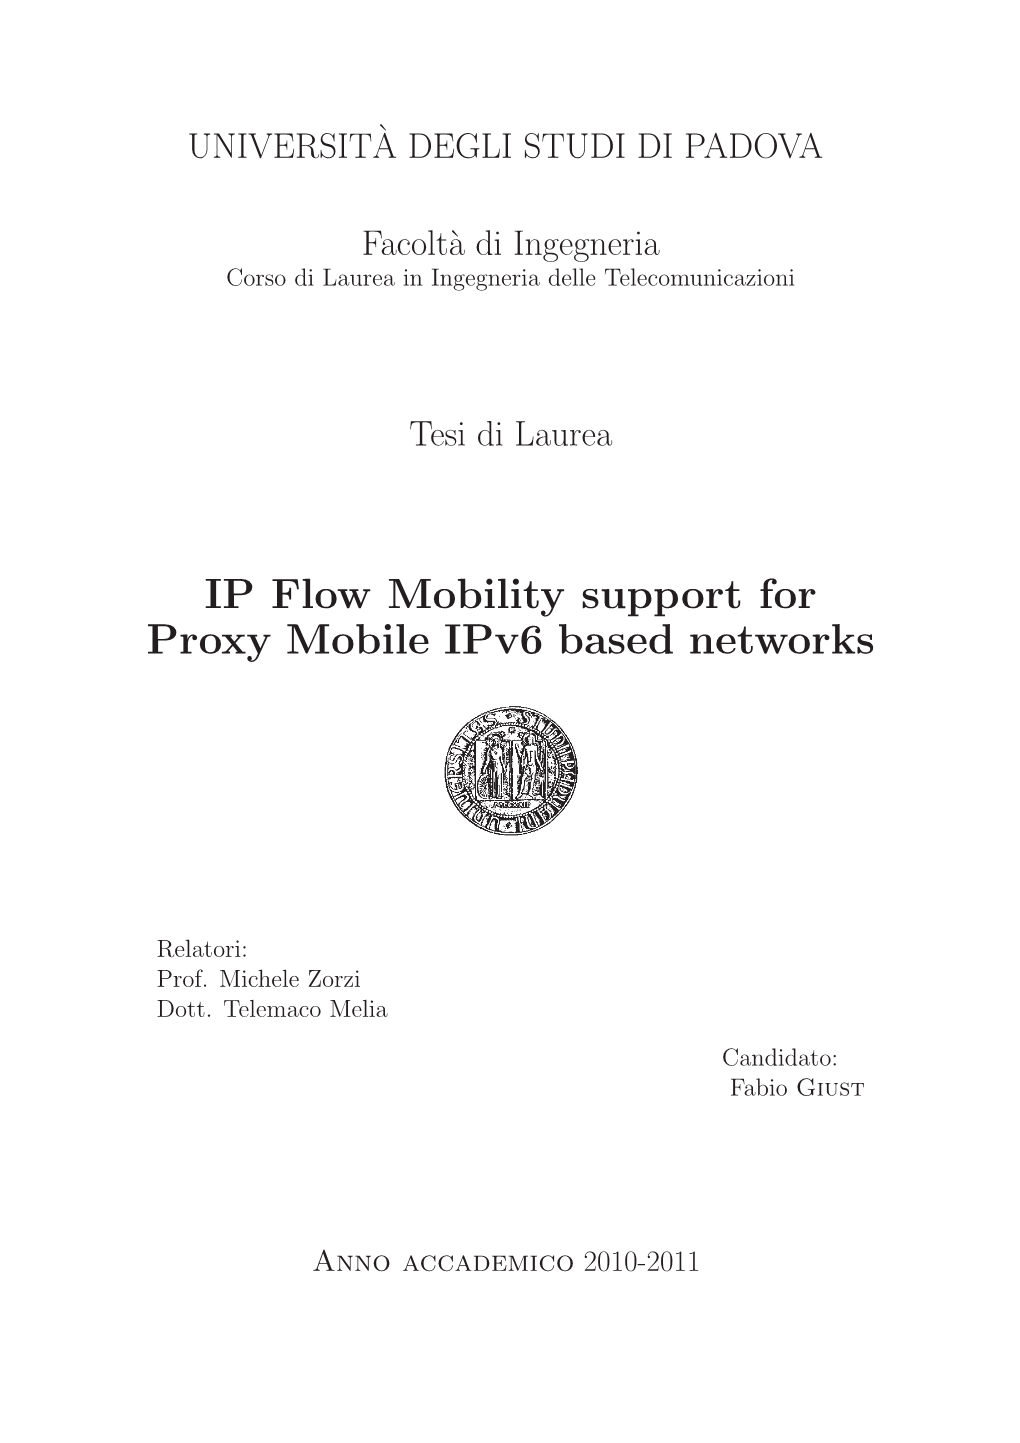 IP Flow Mobility Support for Proxy Mobile Ipv6 Based Networks